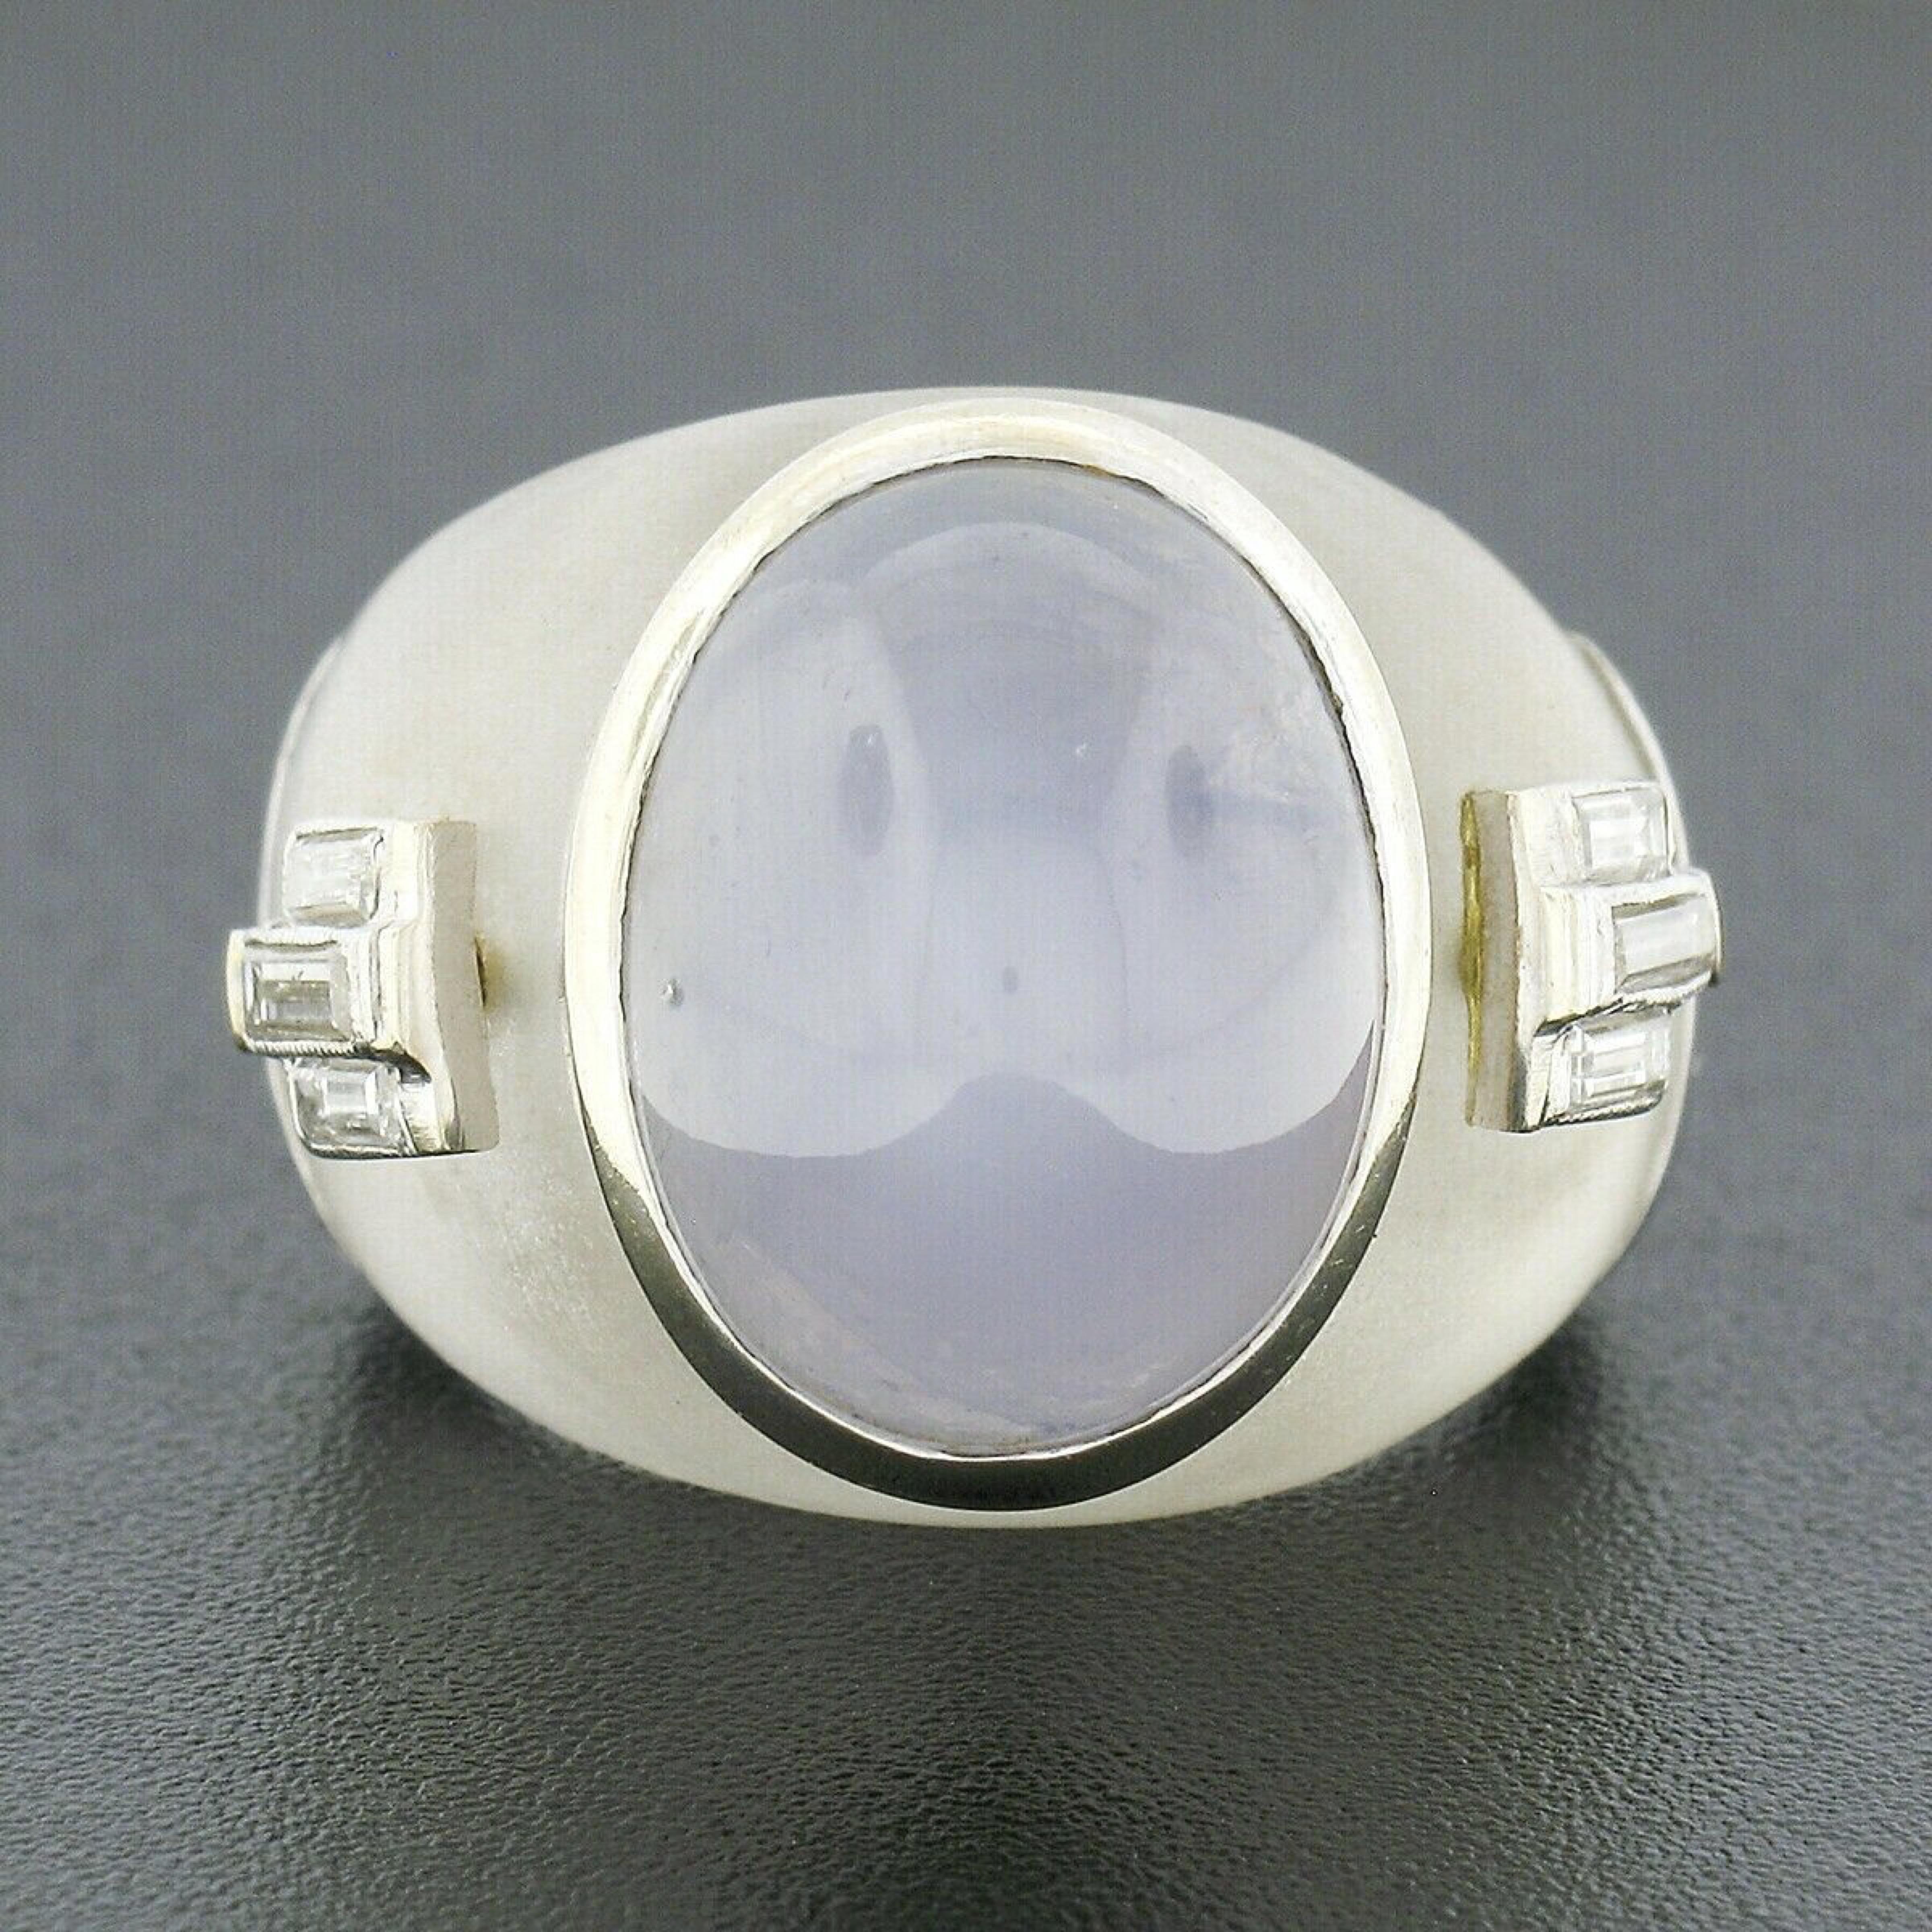 This large vintage statement ring is crafted in solid 18k white gold and features a magnificent, oval cabochon natural star sapphire bezel set at its center. The sapphire has rich and attractive and desirable gray-blue color with a well centered,